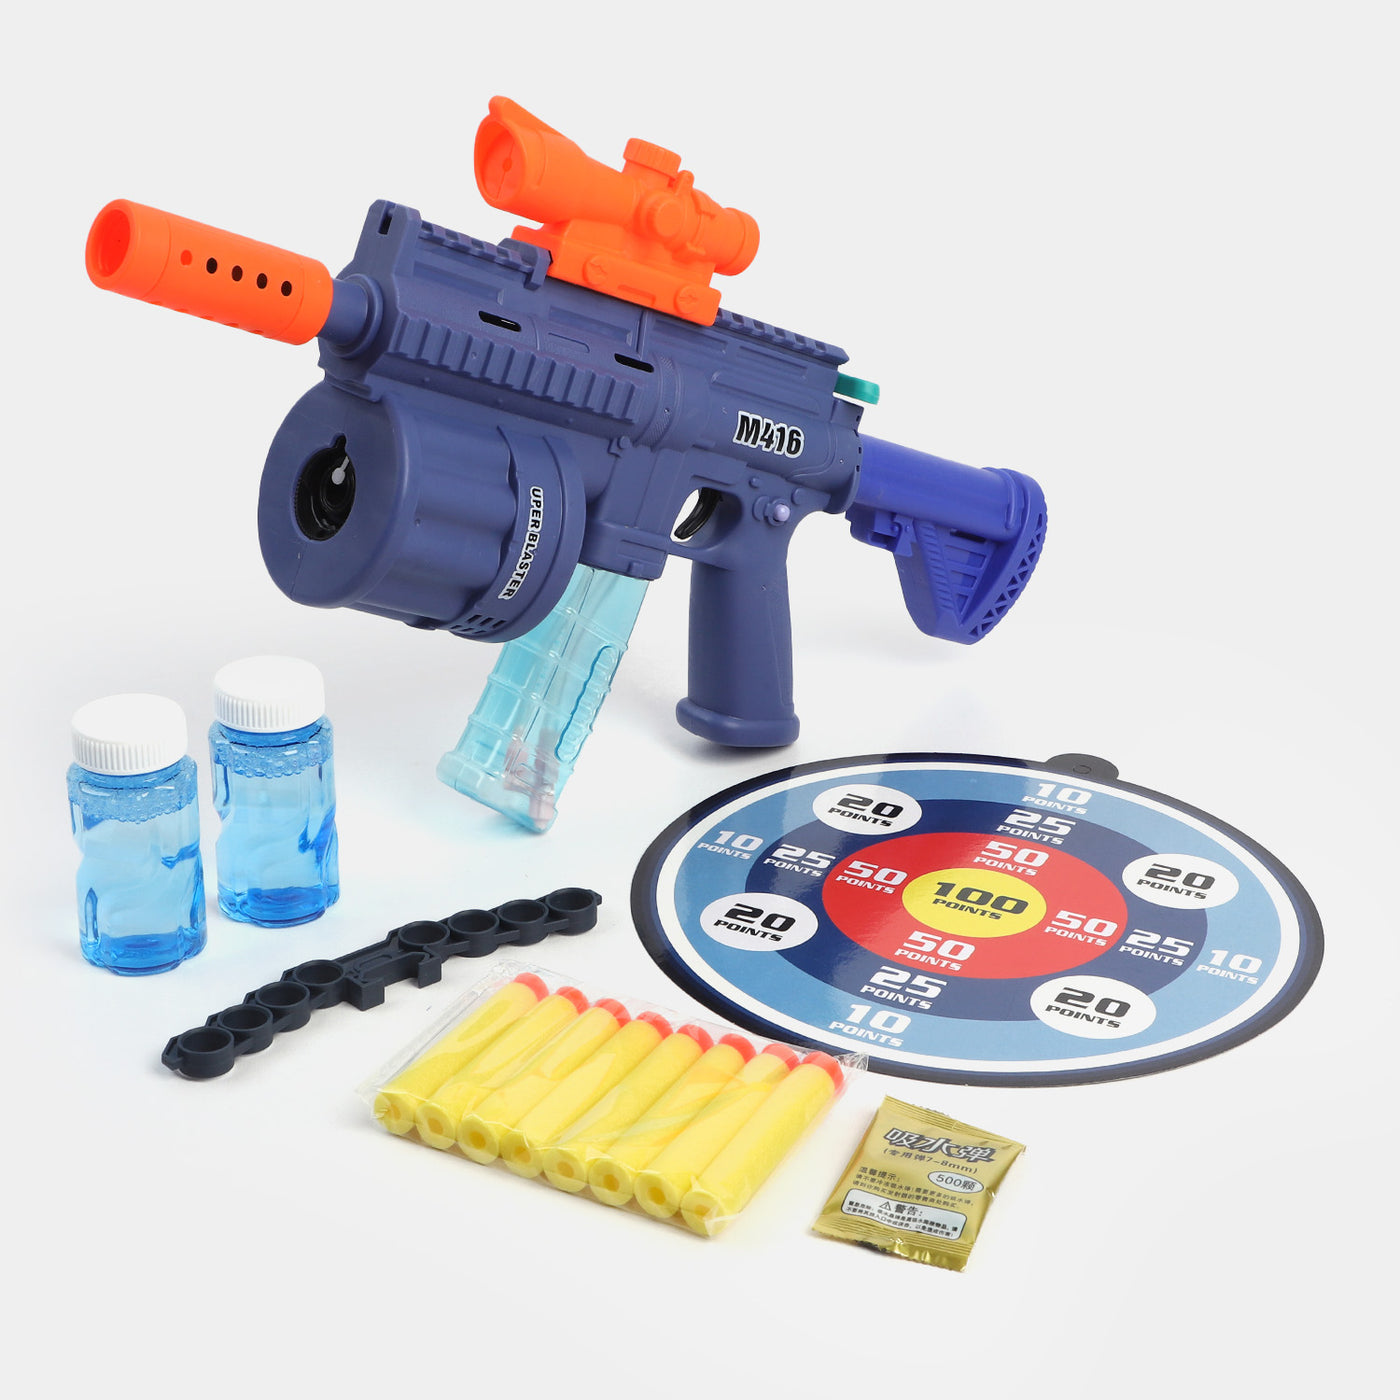 3-in-1 Multifunctional Target Toy For kids